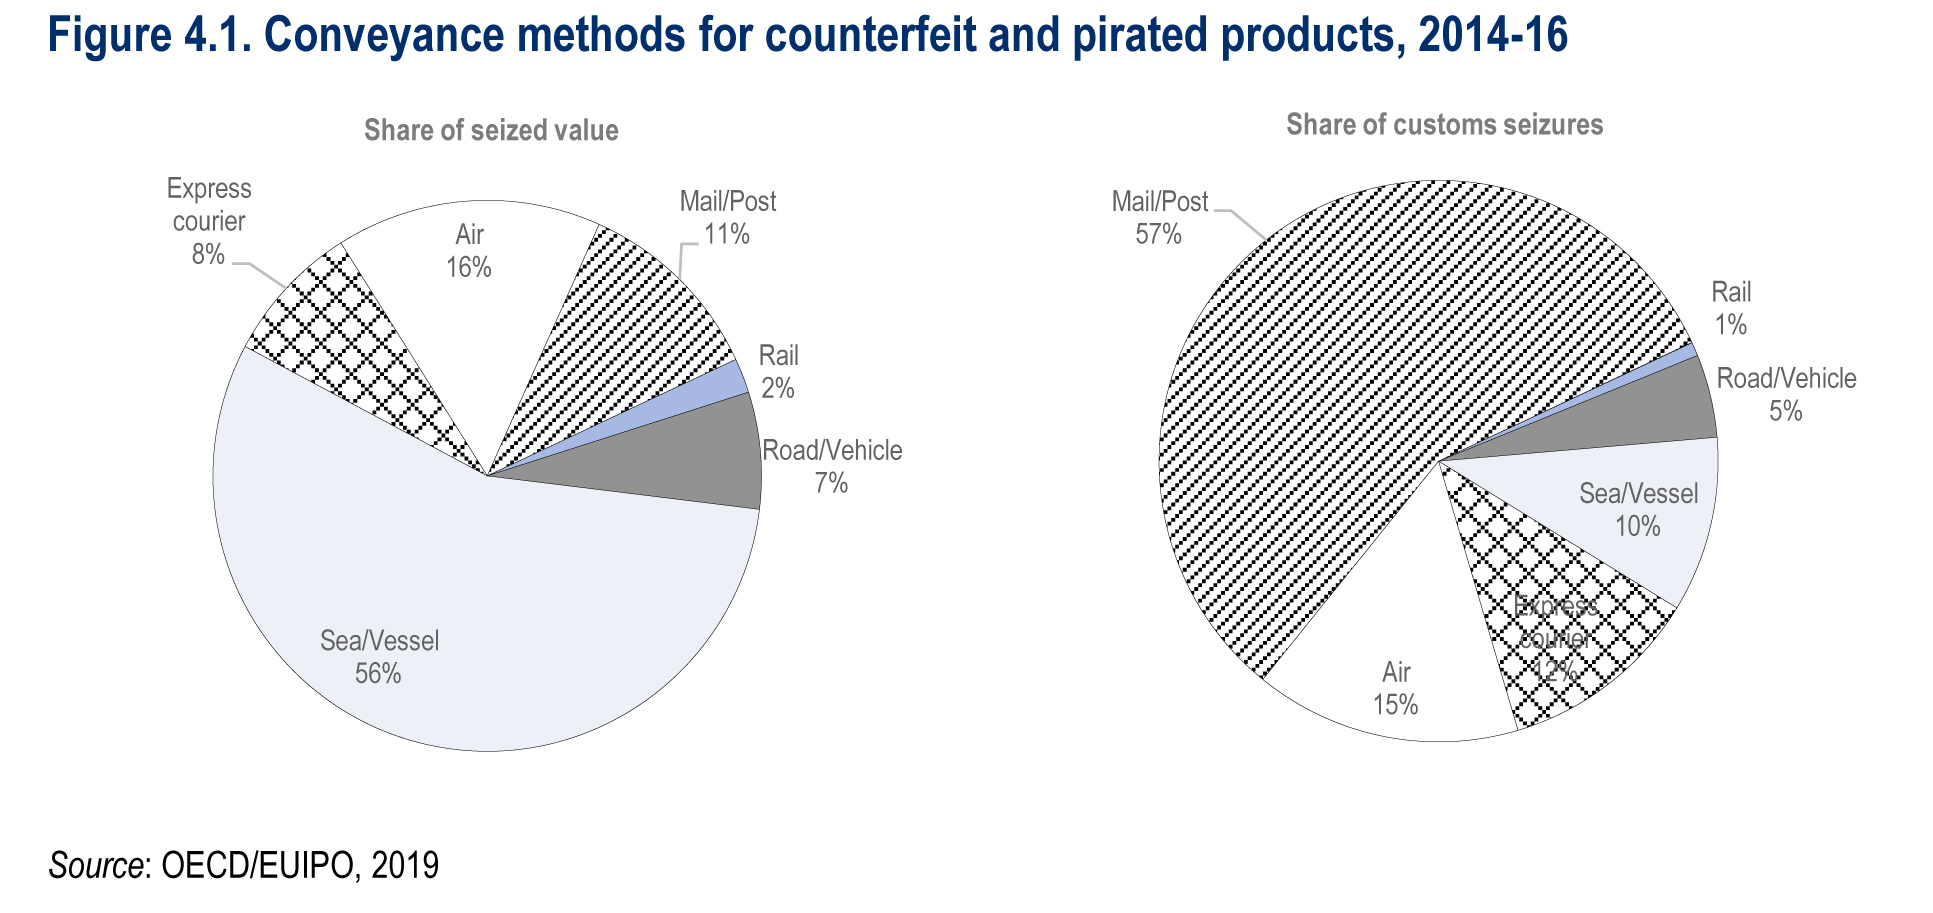 Conveyance methods for counterfeit and pirated products, 2014-2016